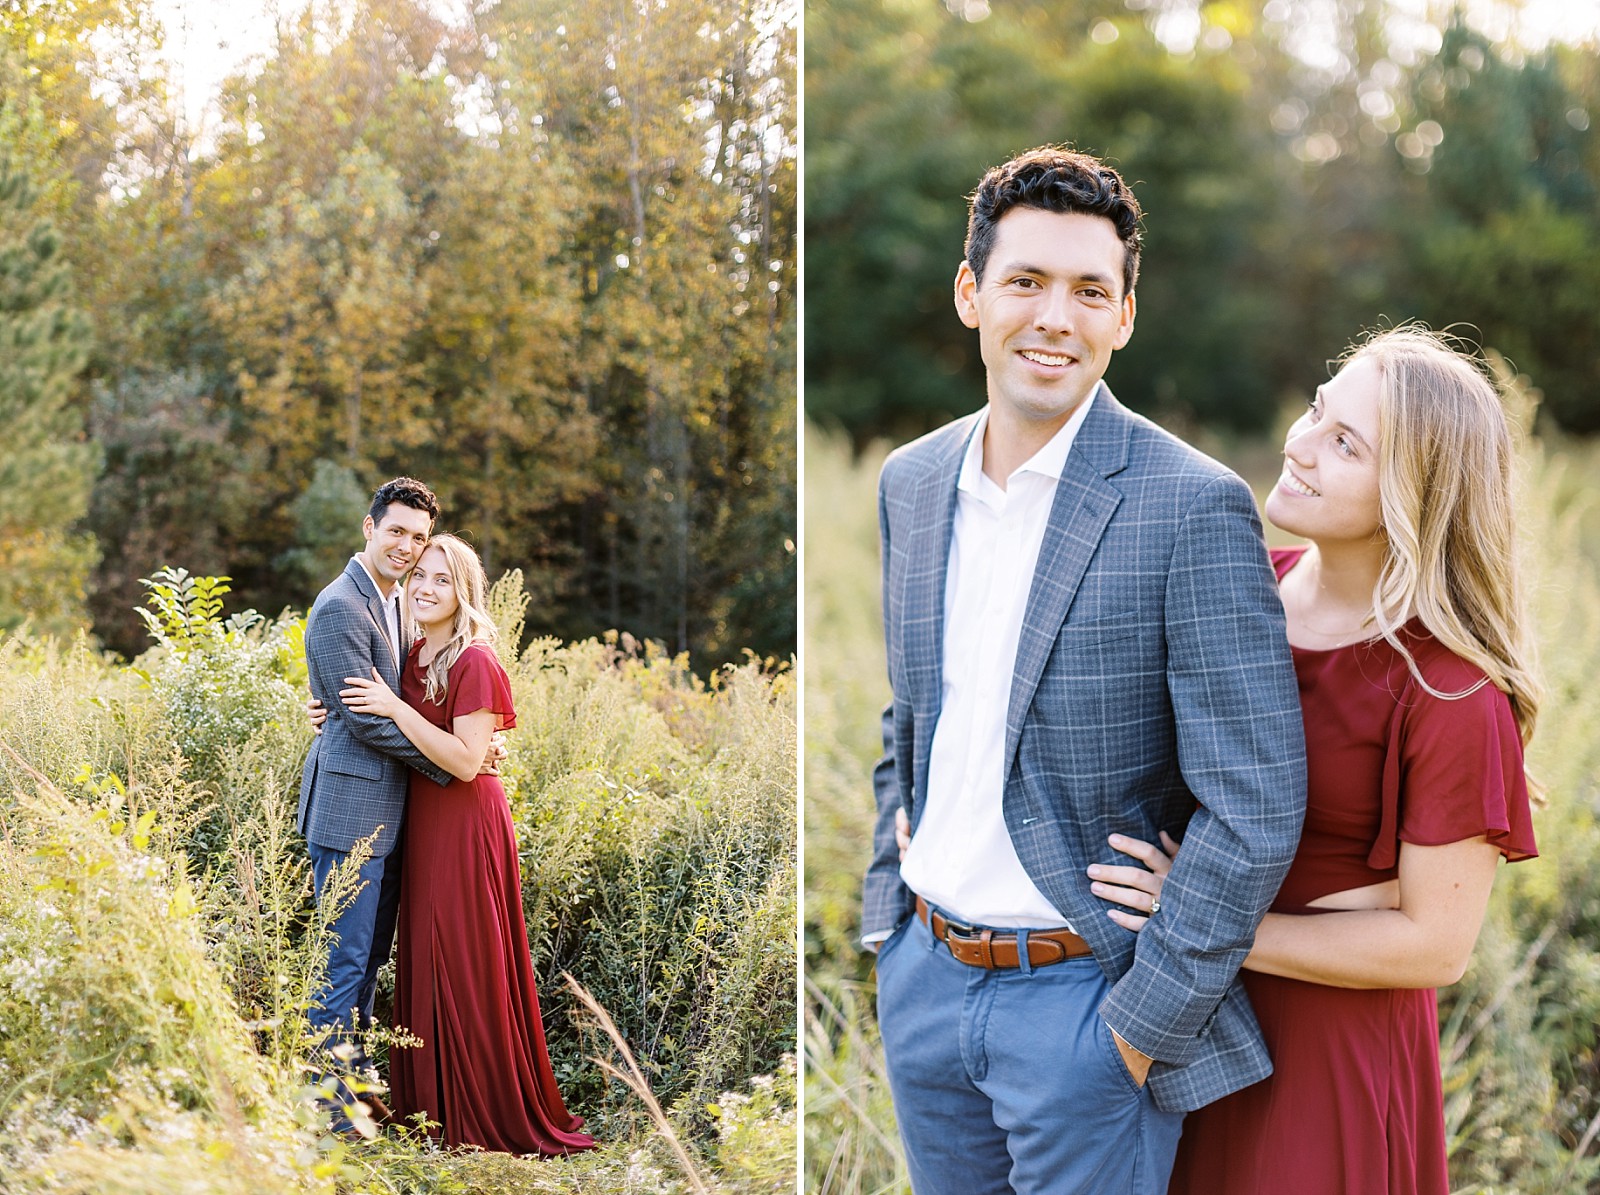 Bride to be looking at her future husband and couple in brush during Joyner Park fall engagement session | Raleigh NC wedding photographer